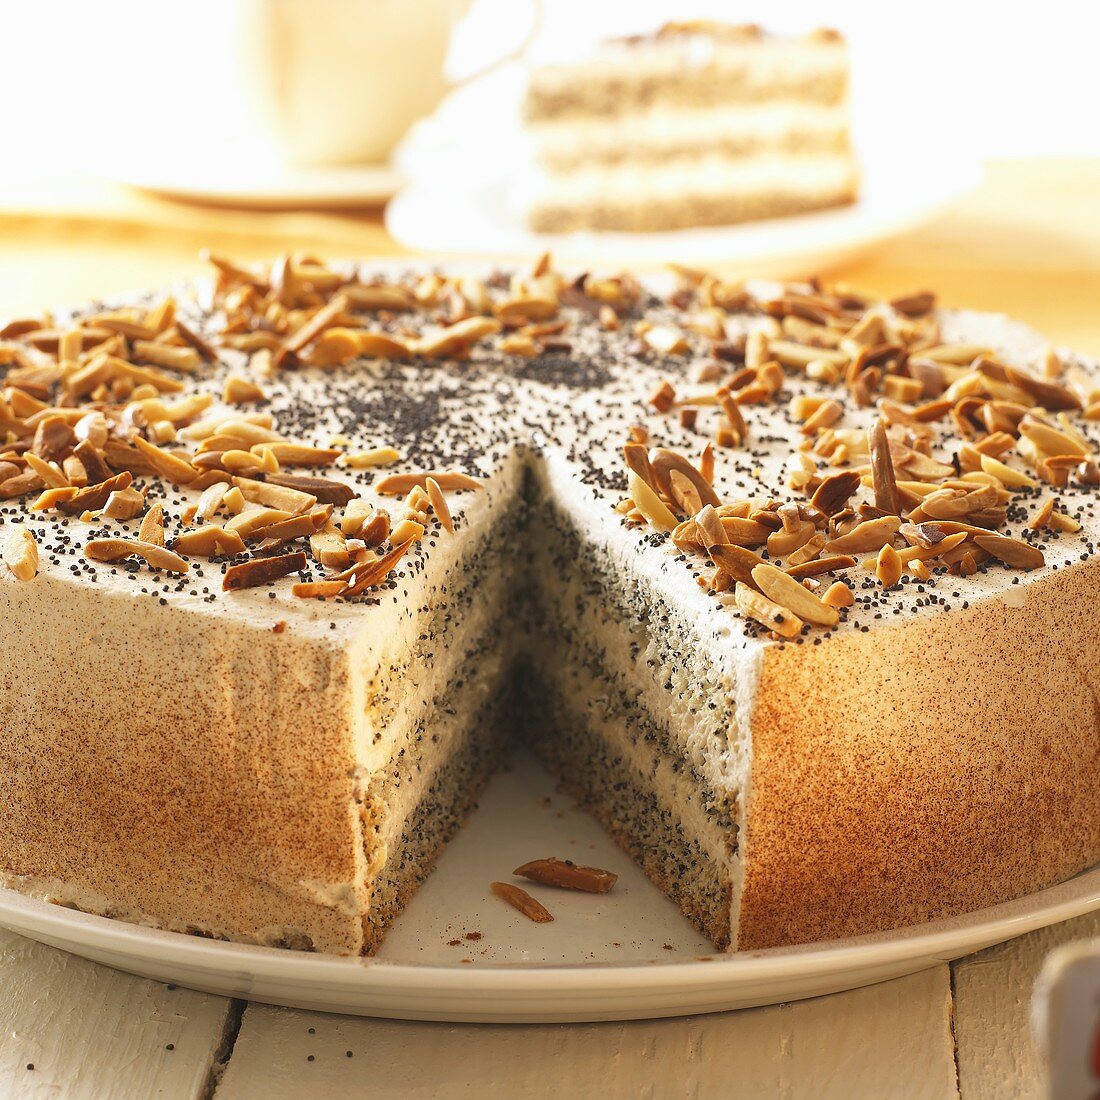 Poppy seed cake with slivered almonds, a piece removed